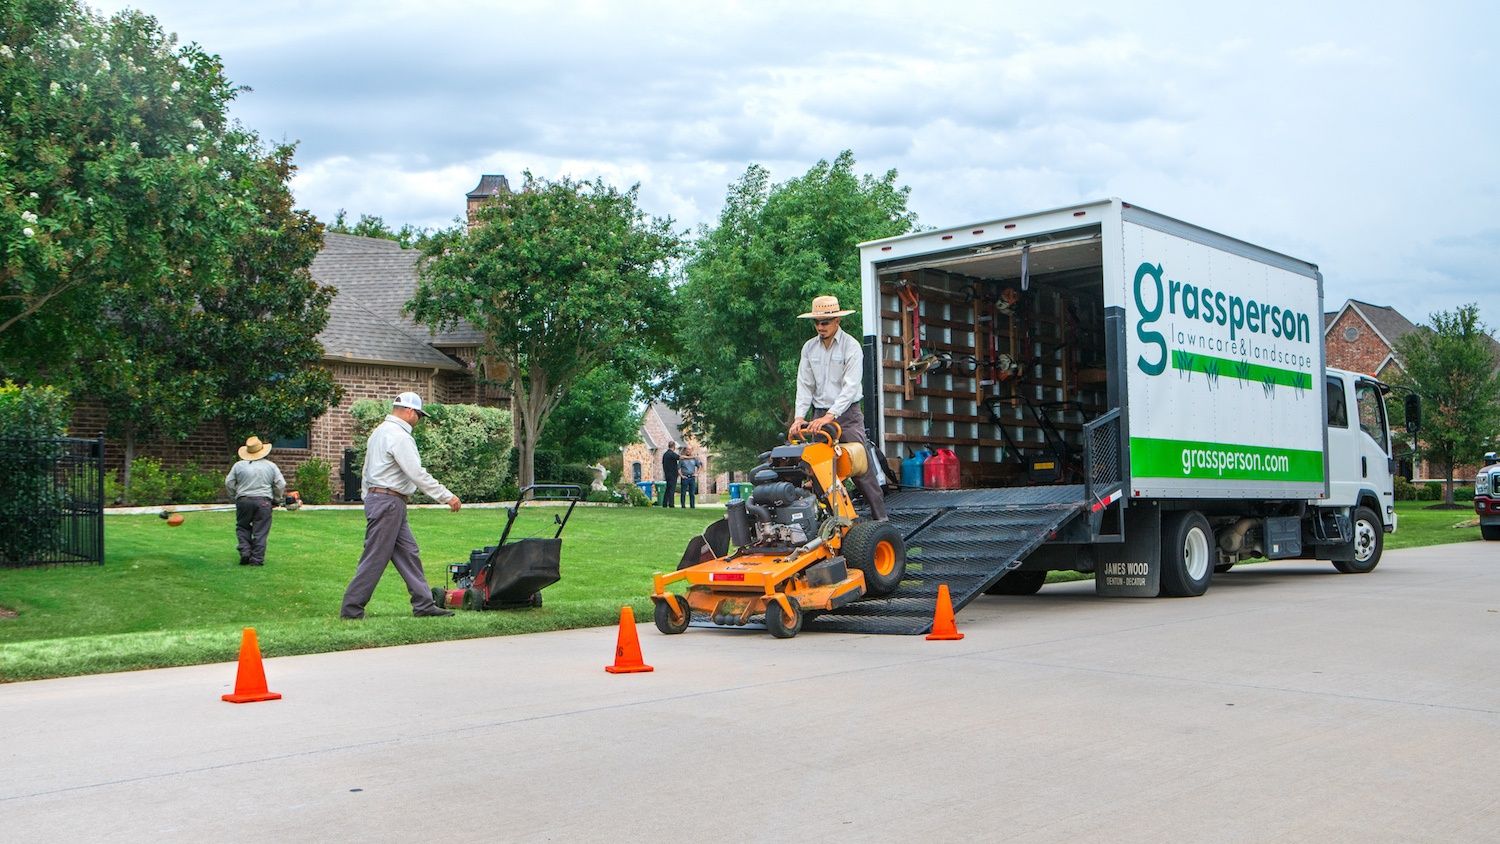 Grassperson lawn care and landscaping truck and crew members performing lawn maintenance